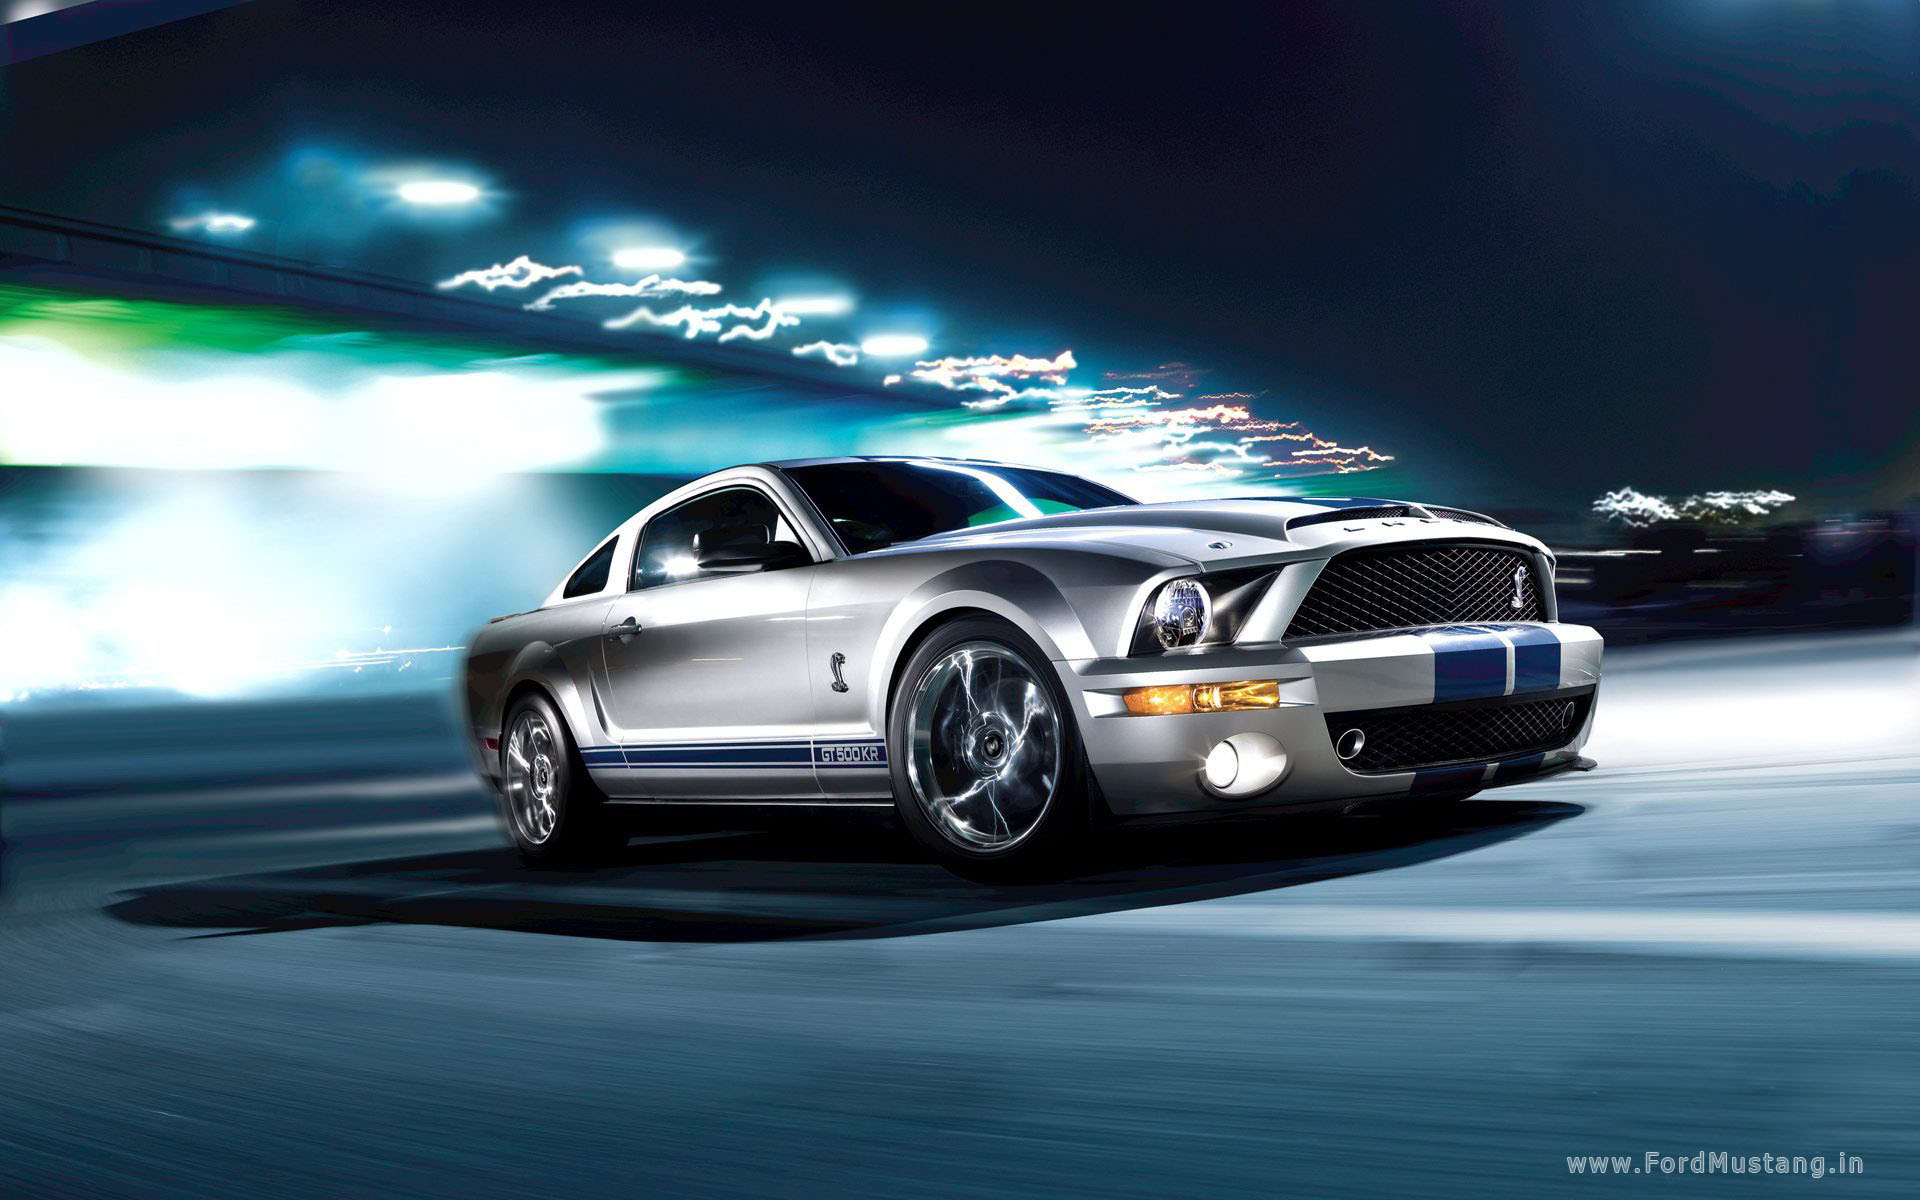 Ford Mustang wallpapers HQ High quality Ford Mustang